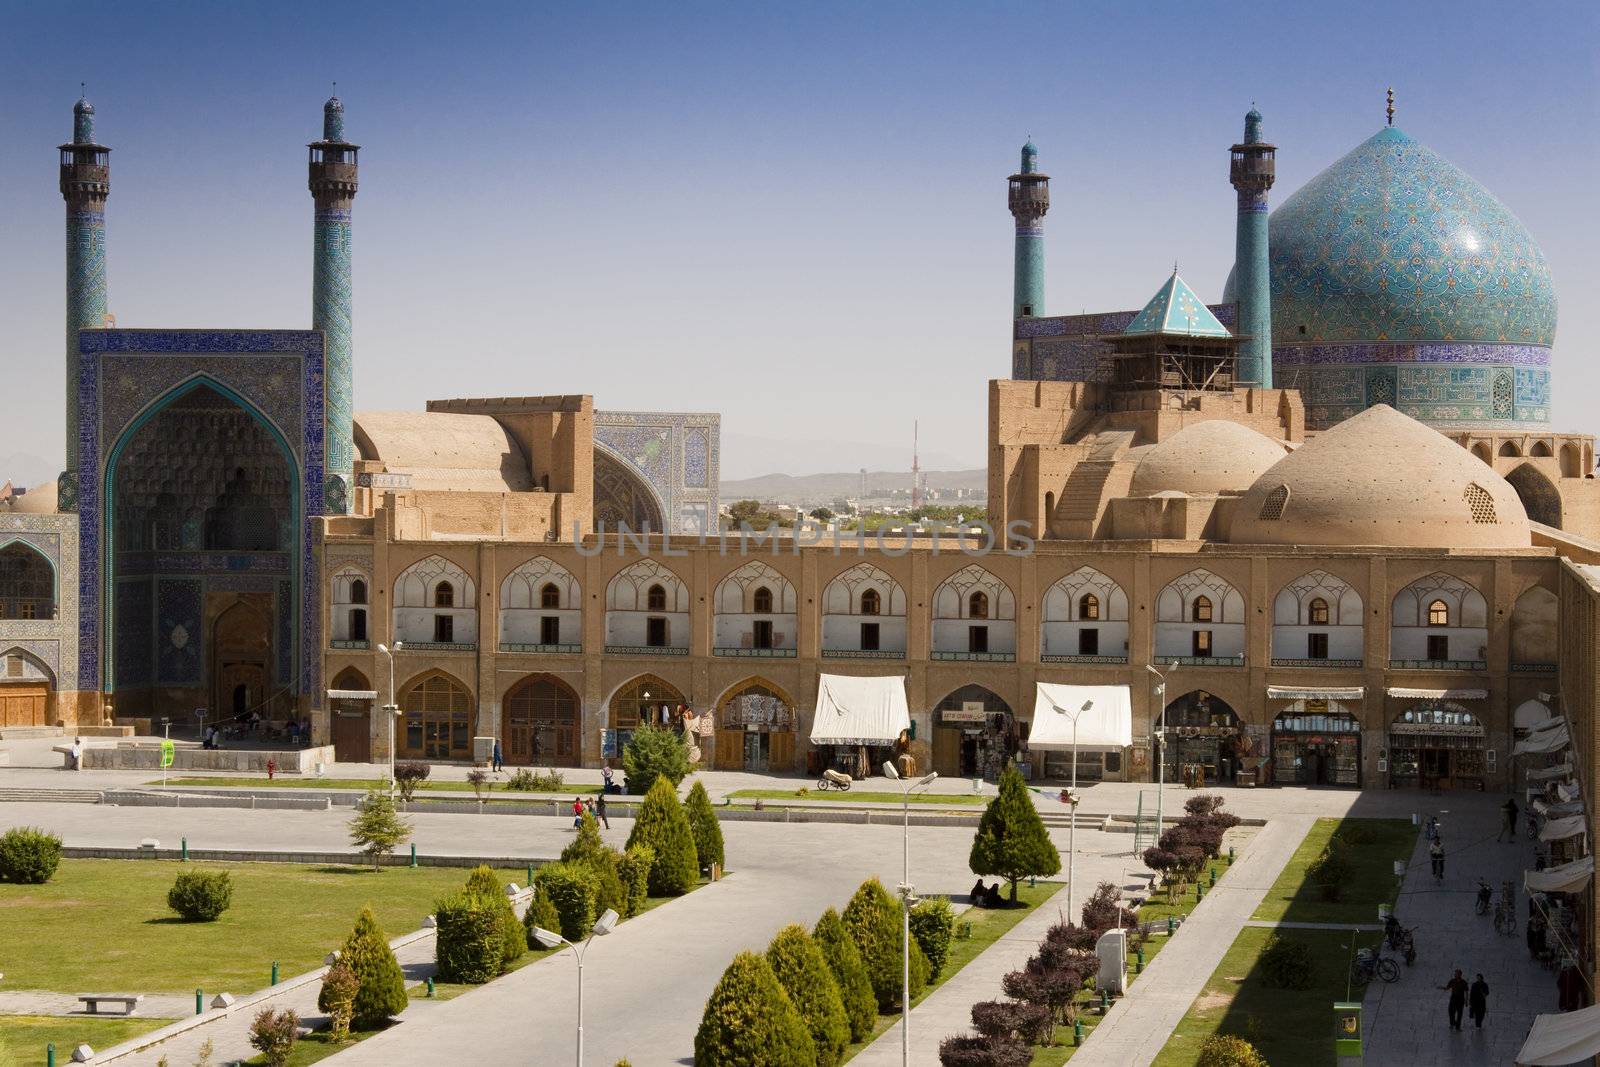 Sheikh Lotf Allah Mosque in Esfahan - Iran, Summer day